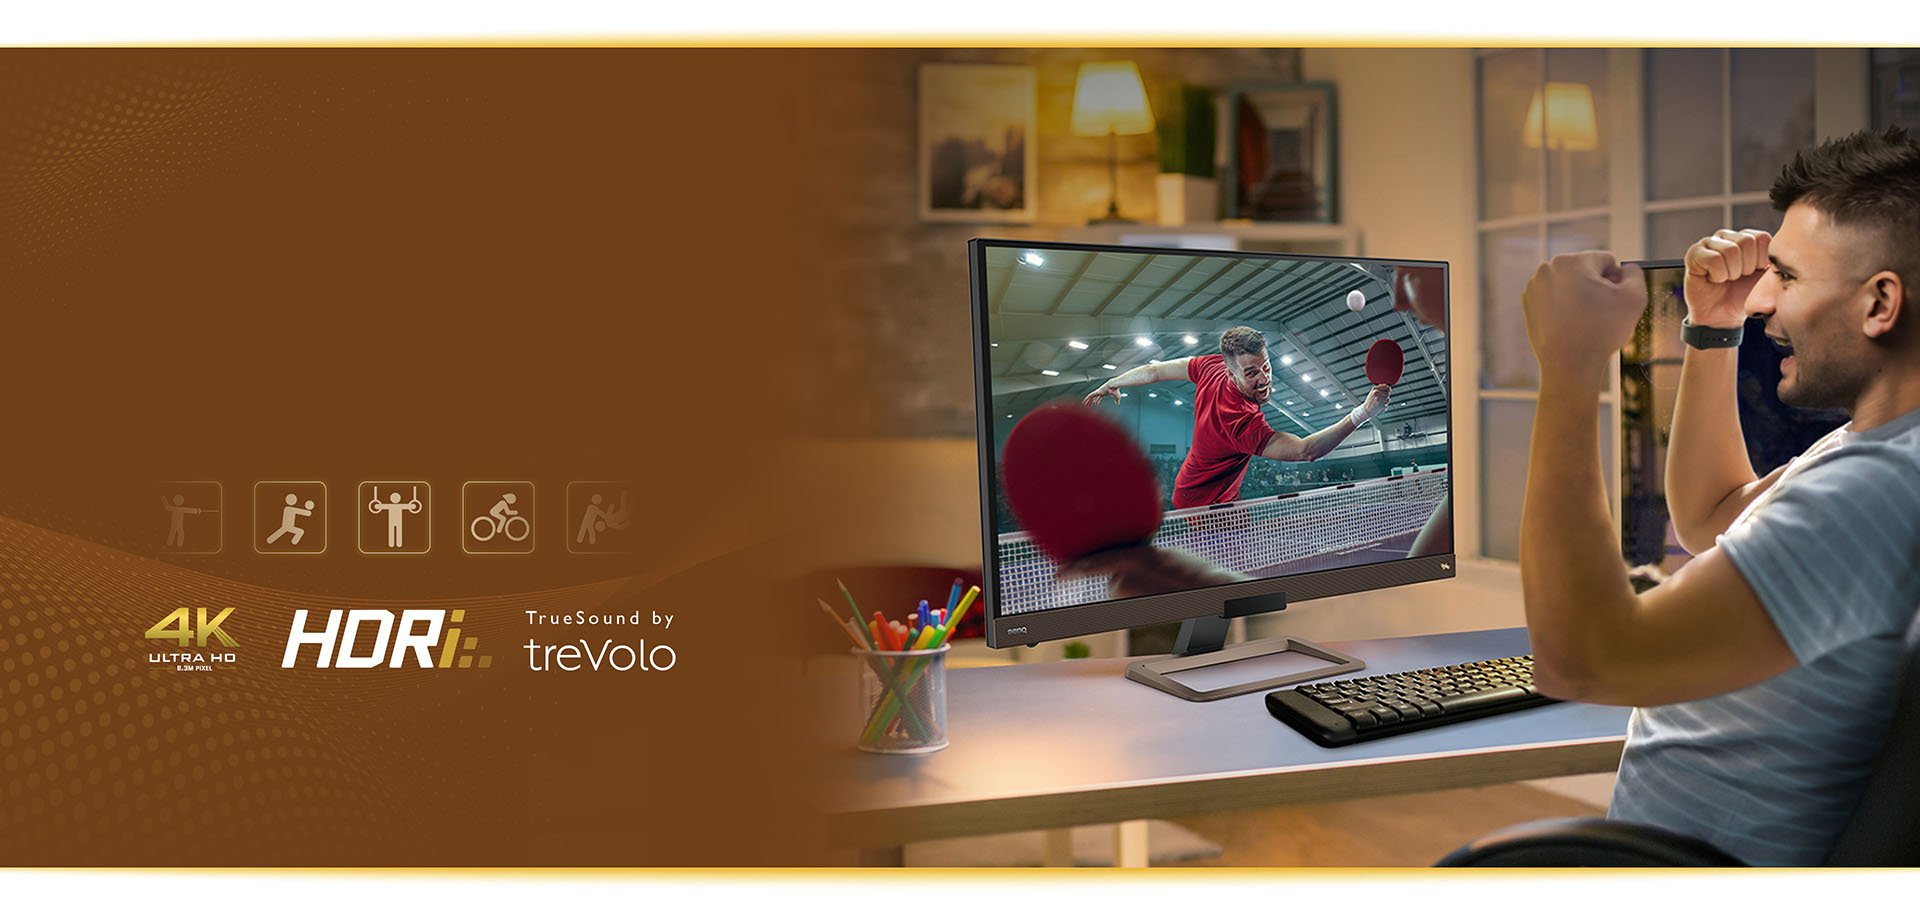 Enjoy the sports game with BenQ entertainment monitors 